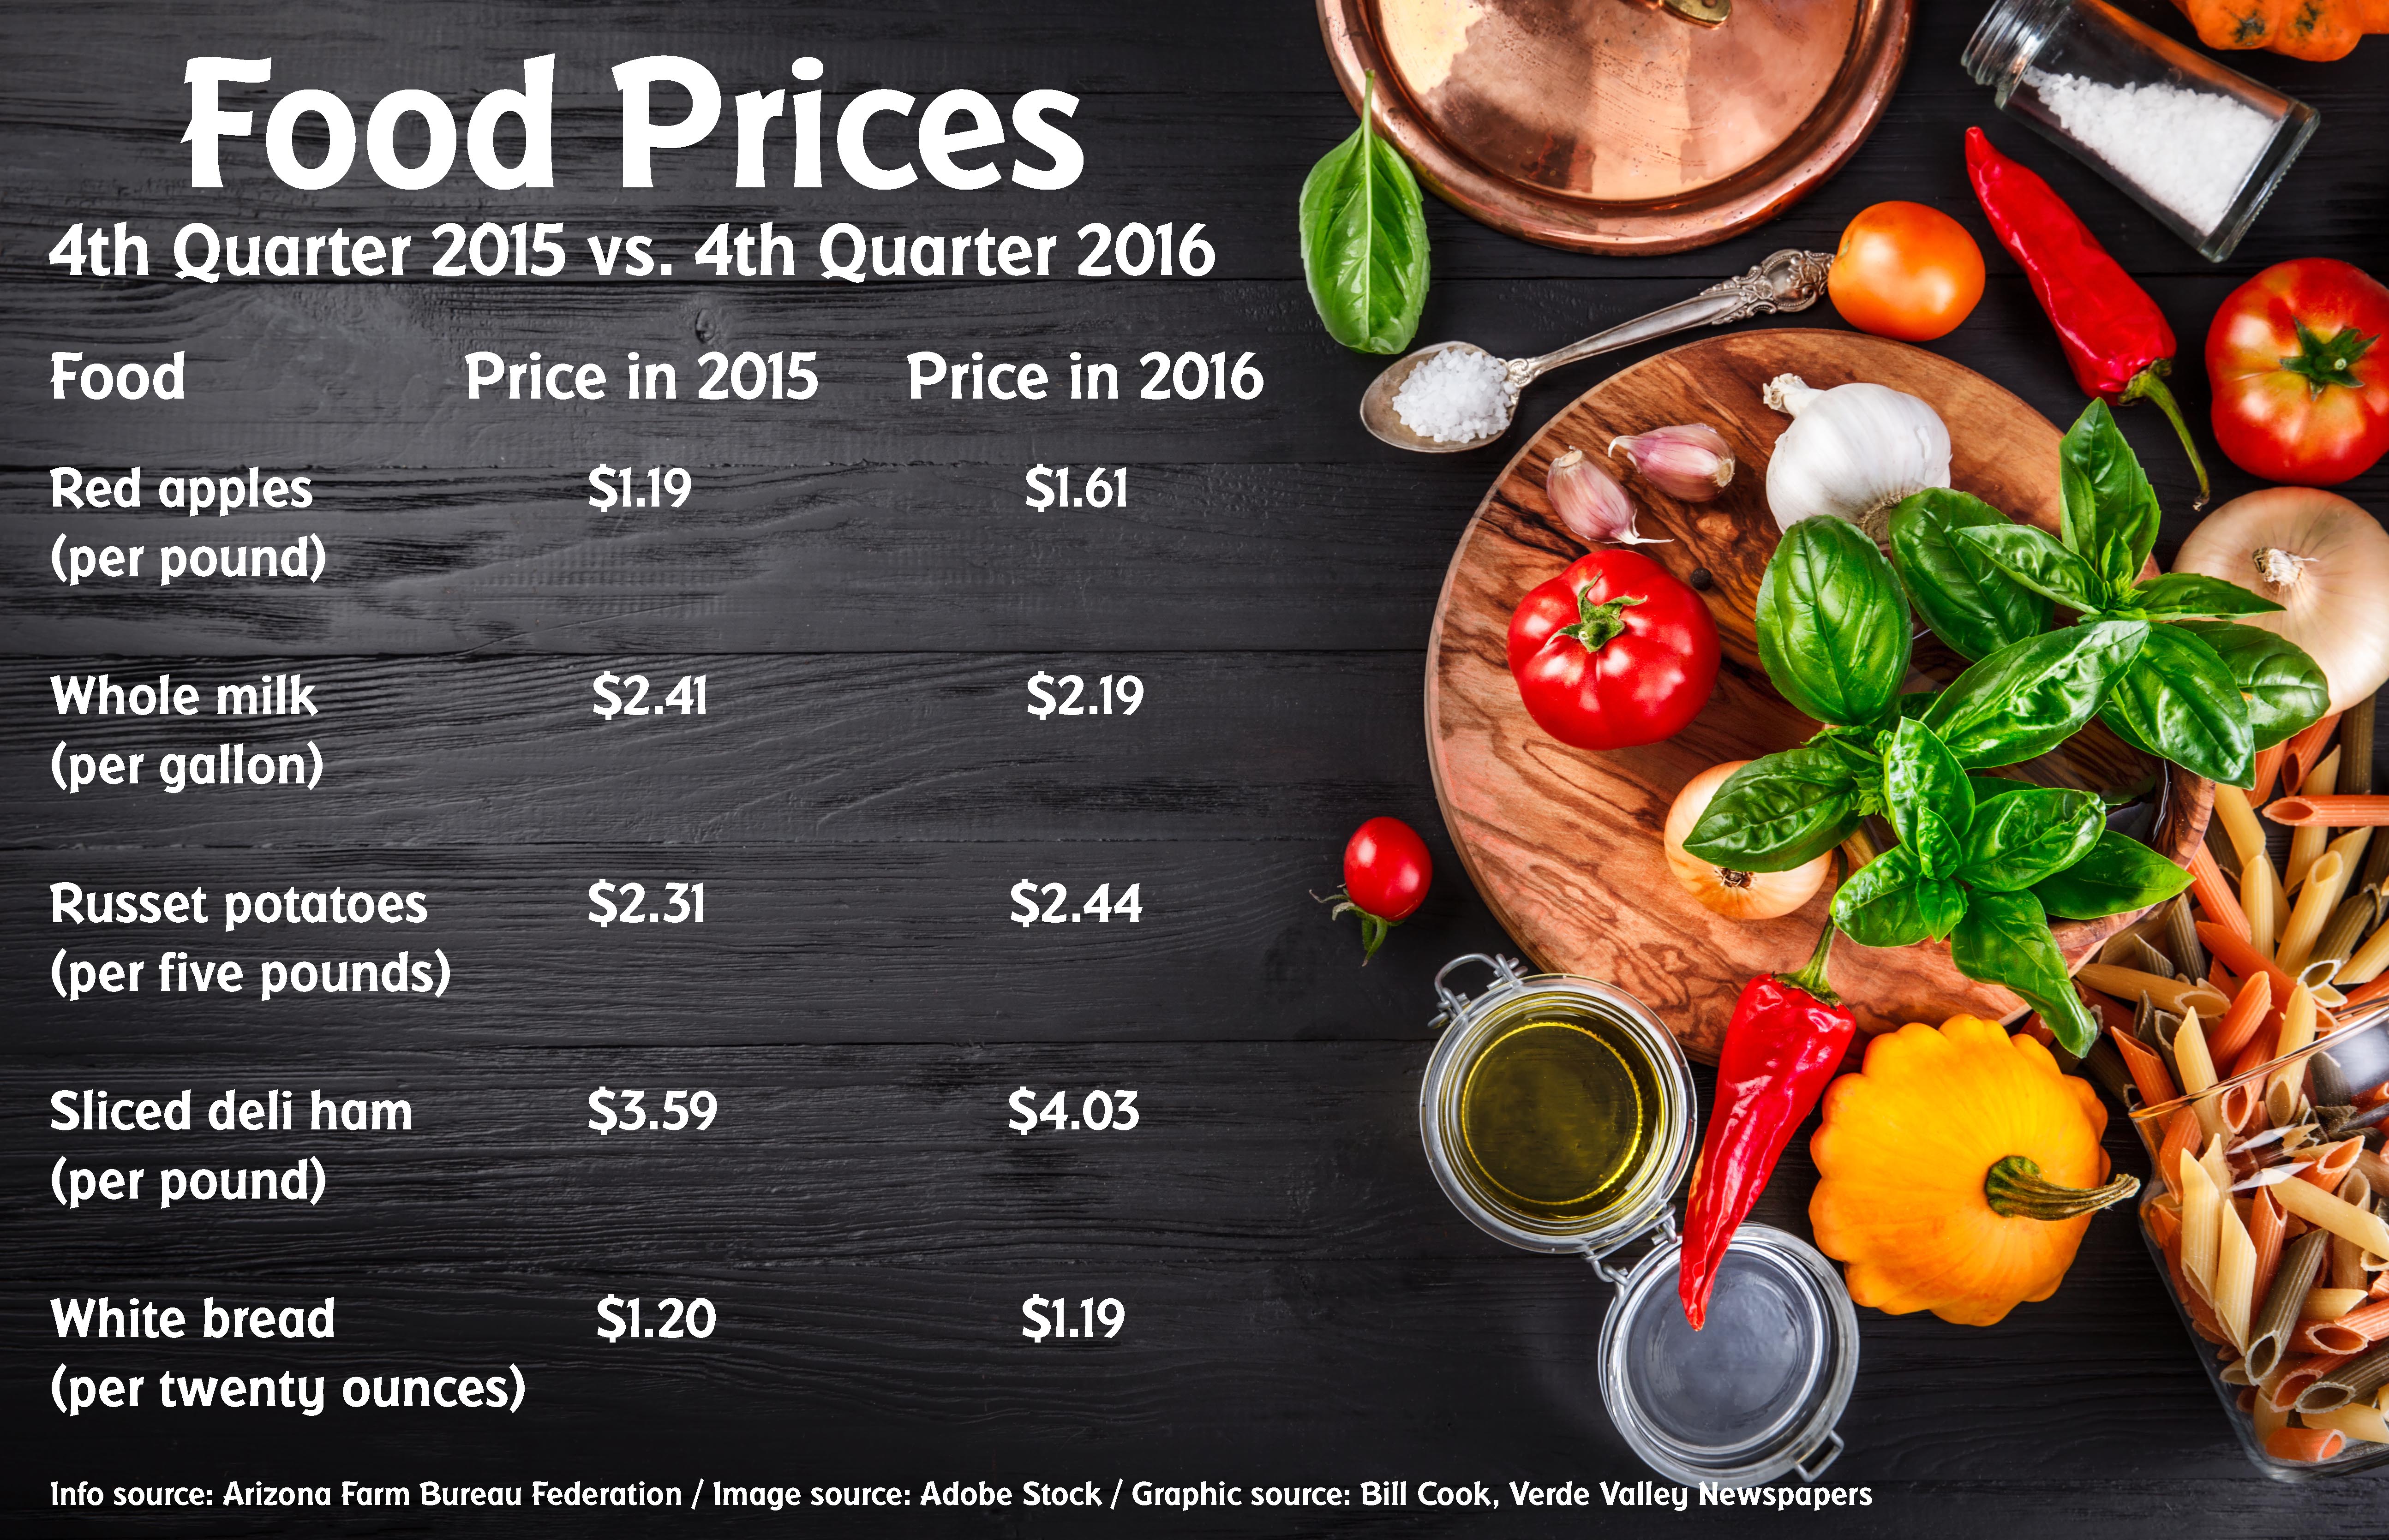 The high prices of food